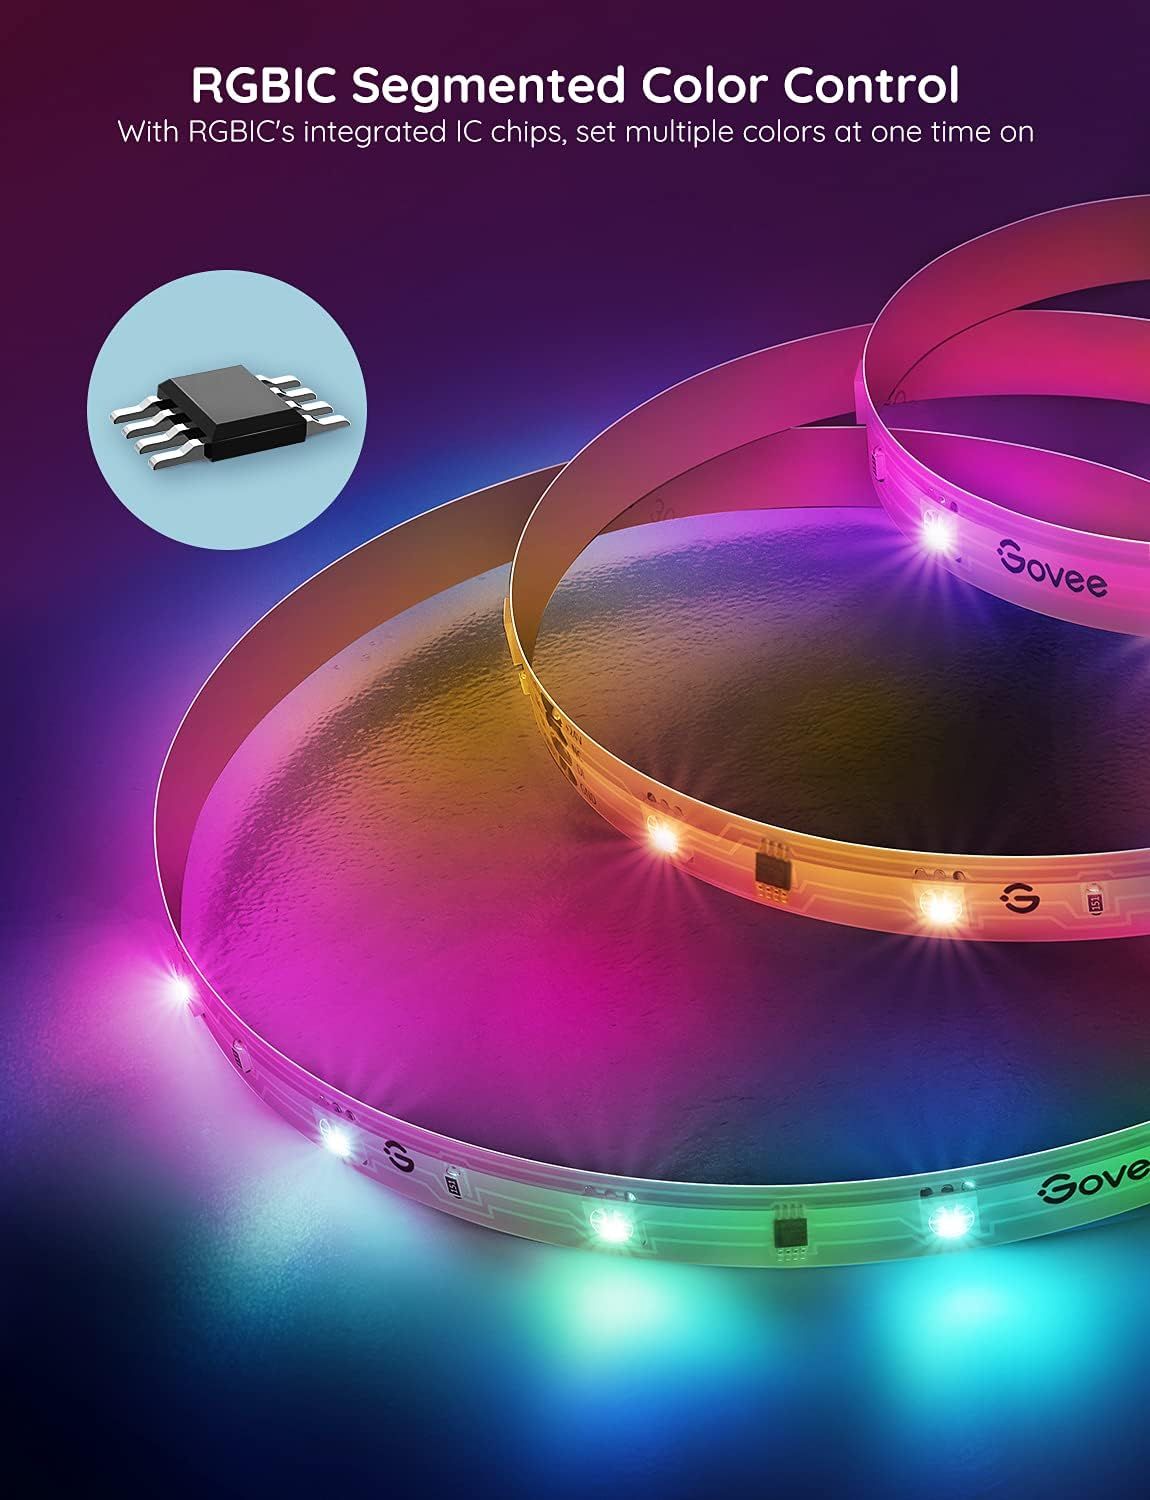 Govee LED Strip Lights, 5m Alexa LED Strip Smart WiFi App Control RGB,  Works with Alexa and Google Assistant, Music Sync LED Lights for Bedroom,  Party